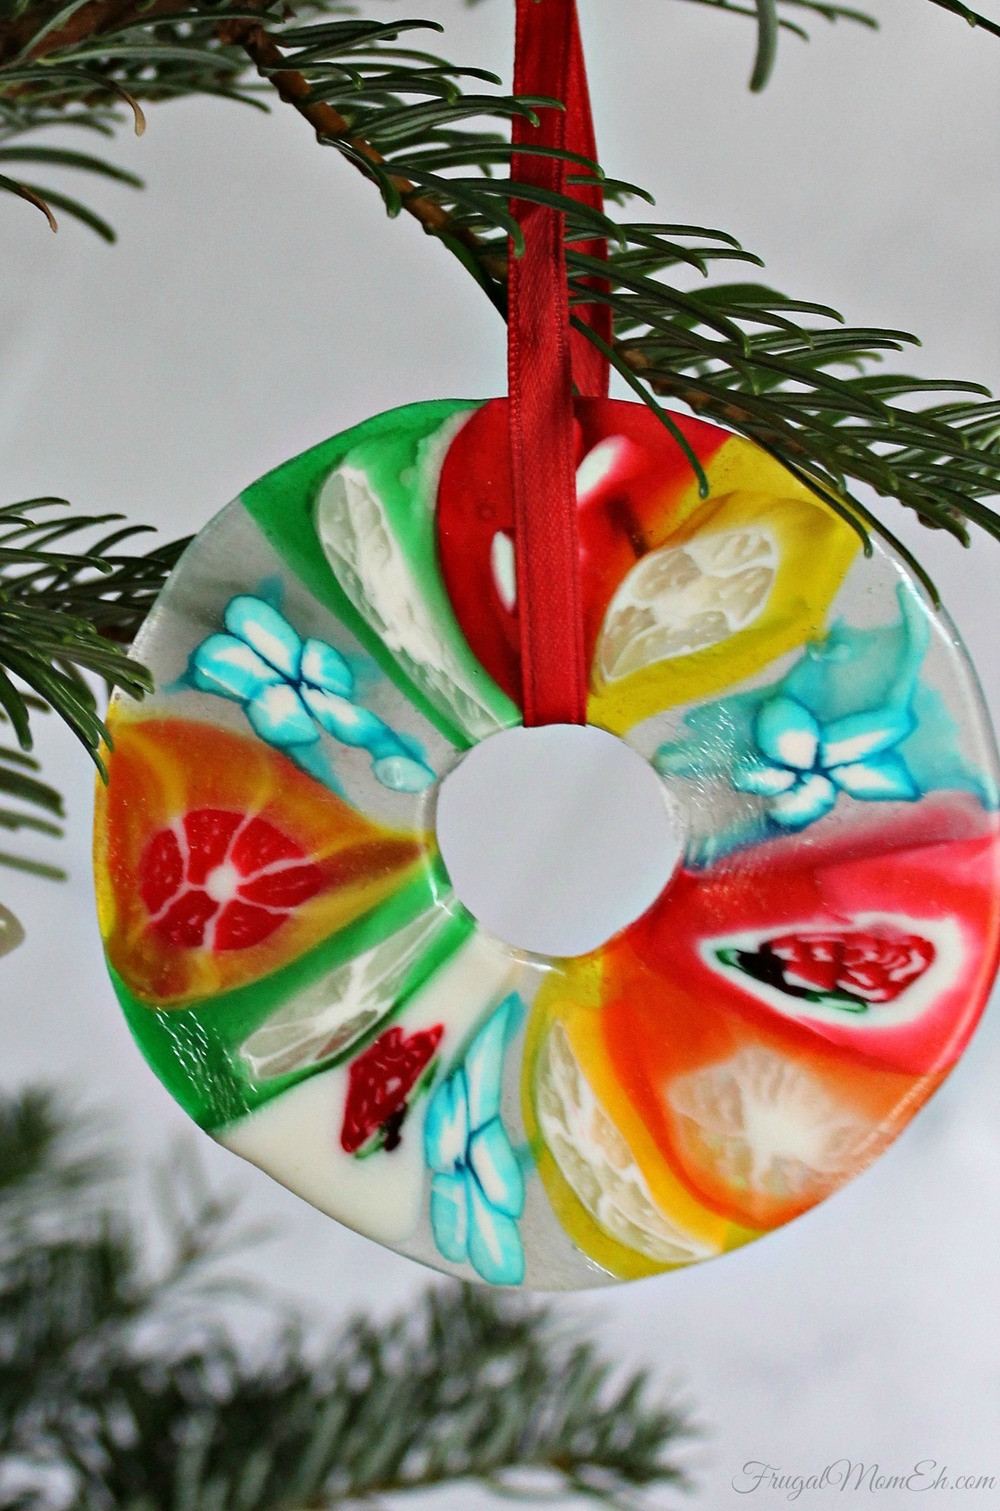 Candy Christmas Ornaments To Make
 Melted Candy Christmas Ornament Craft